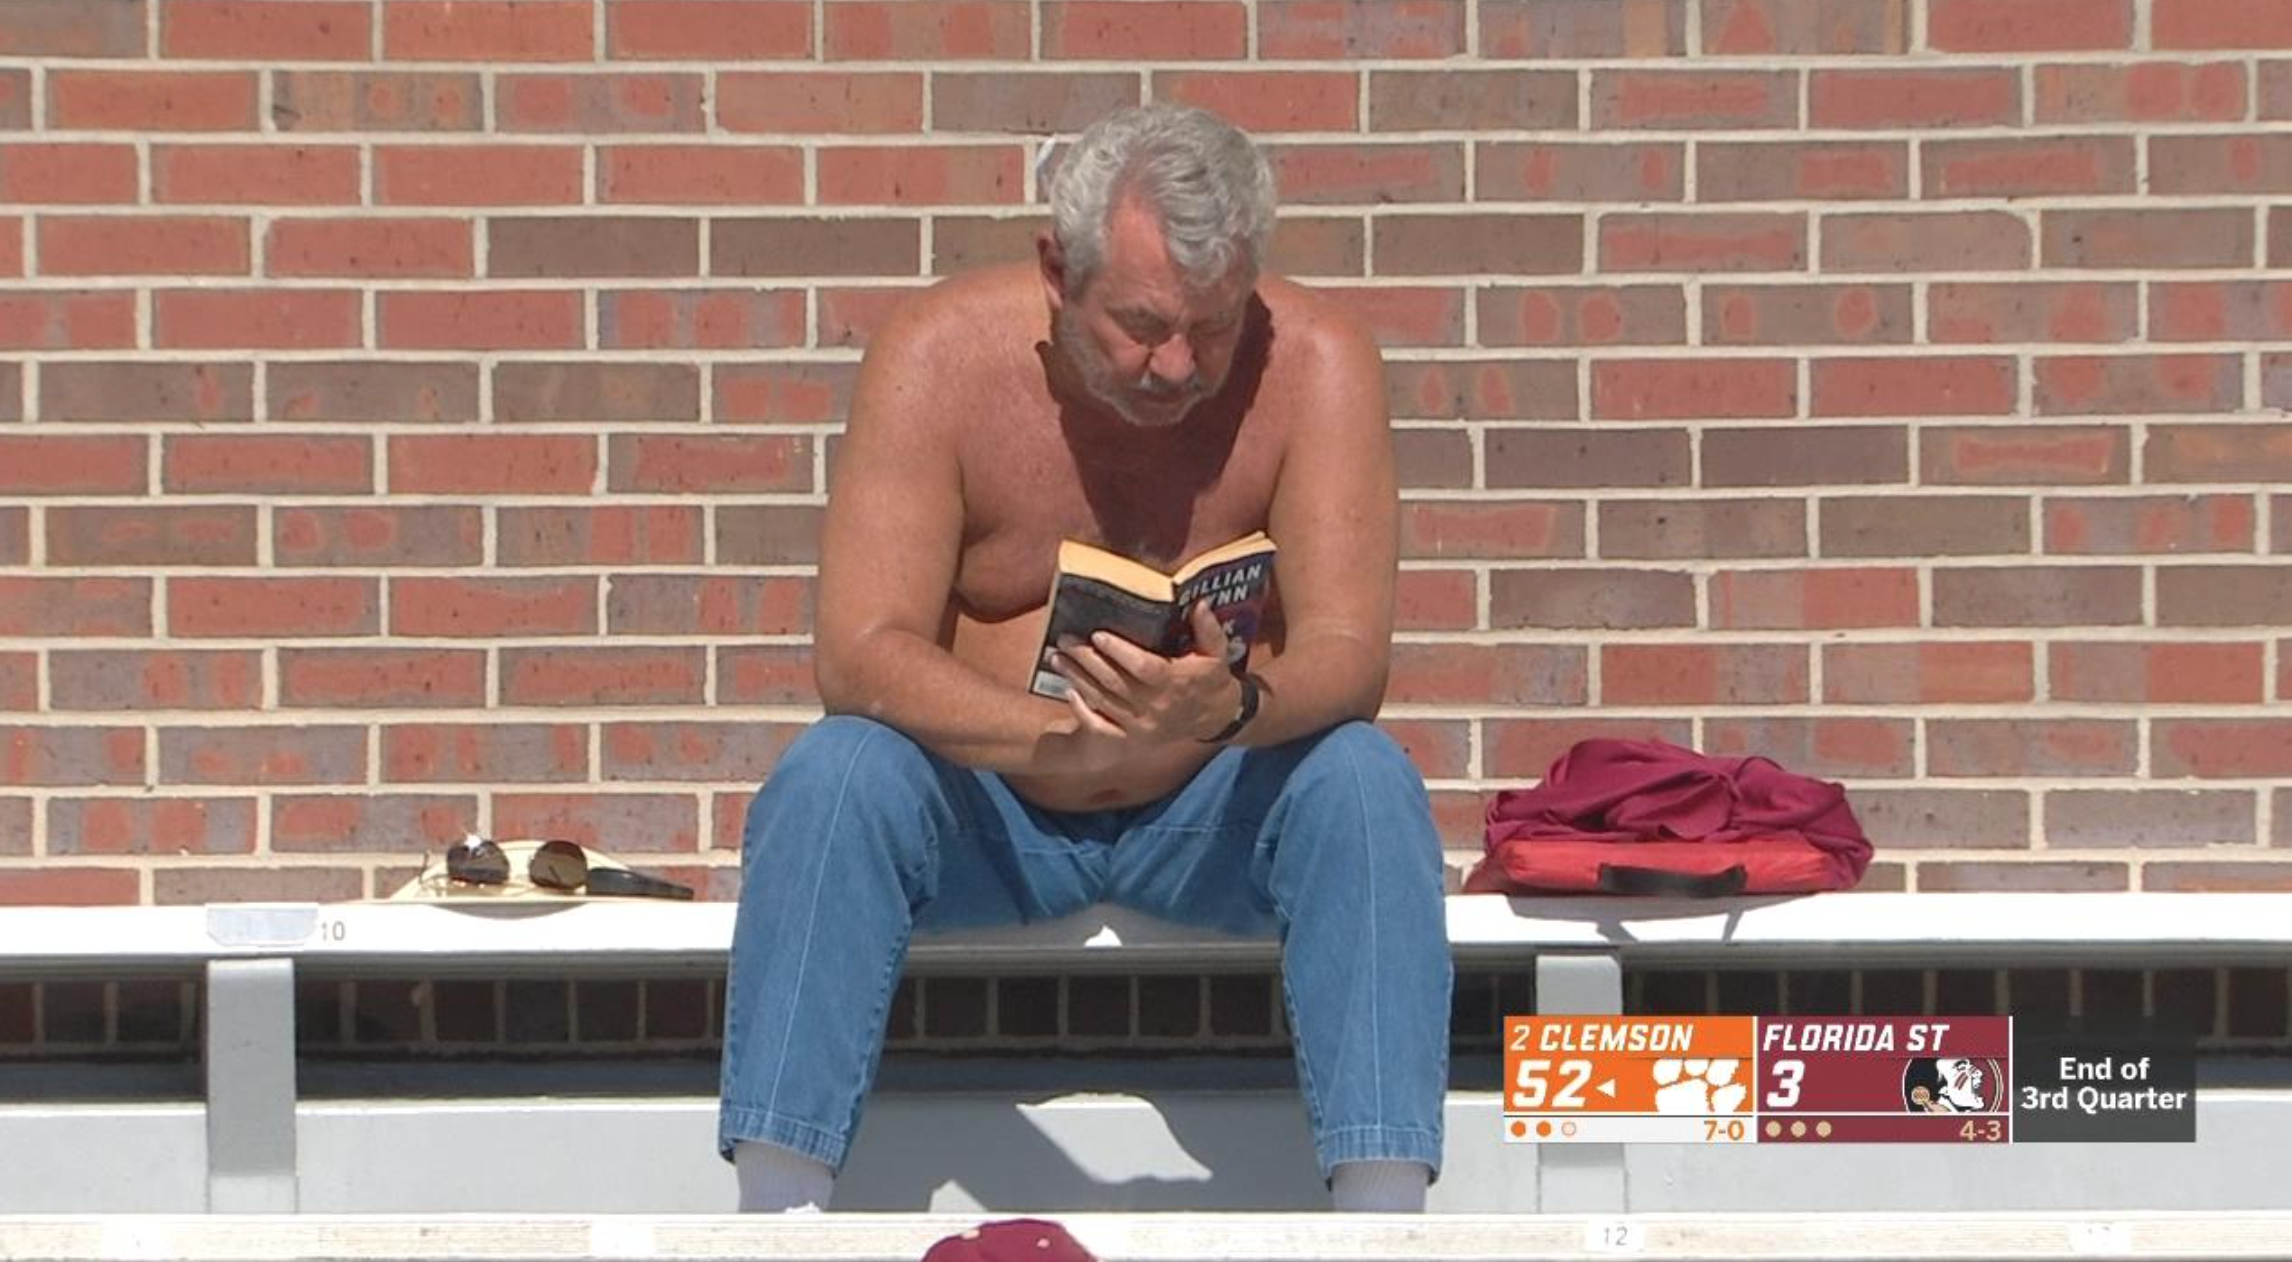 Shirtless FSU fan reading a novel is the real hero of Clemson game